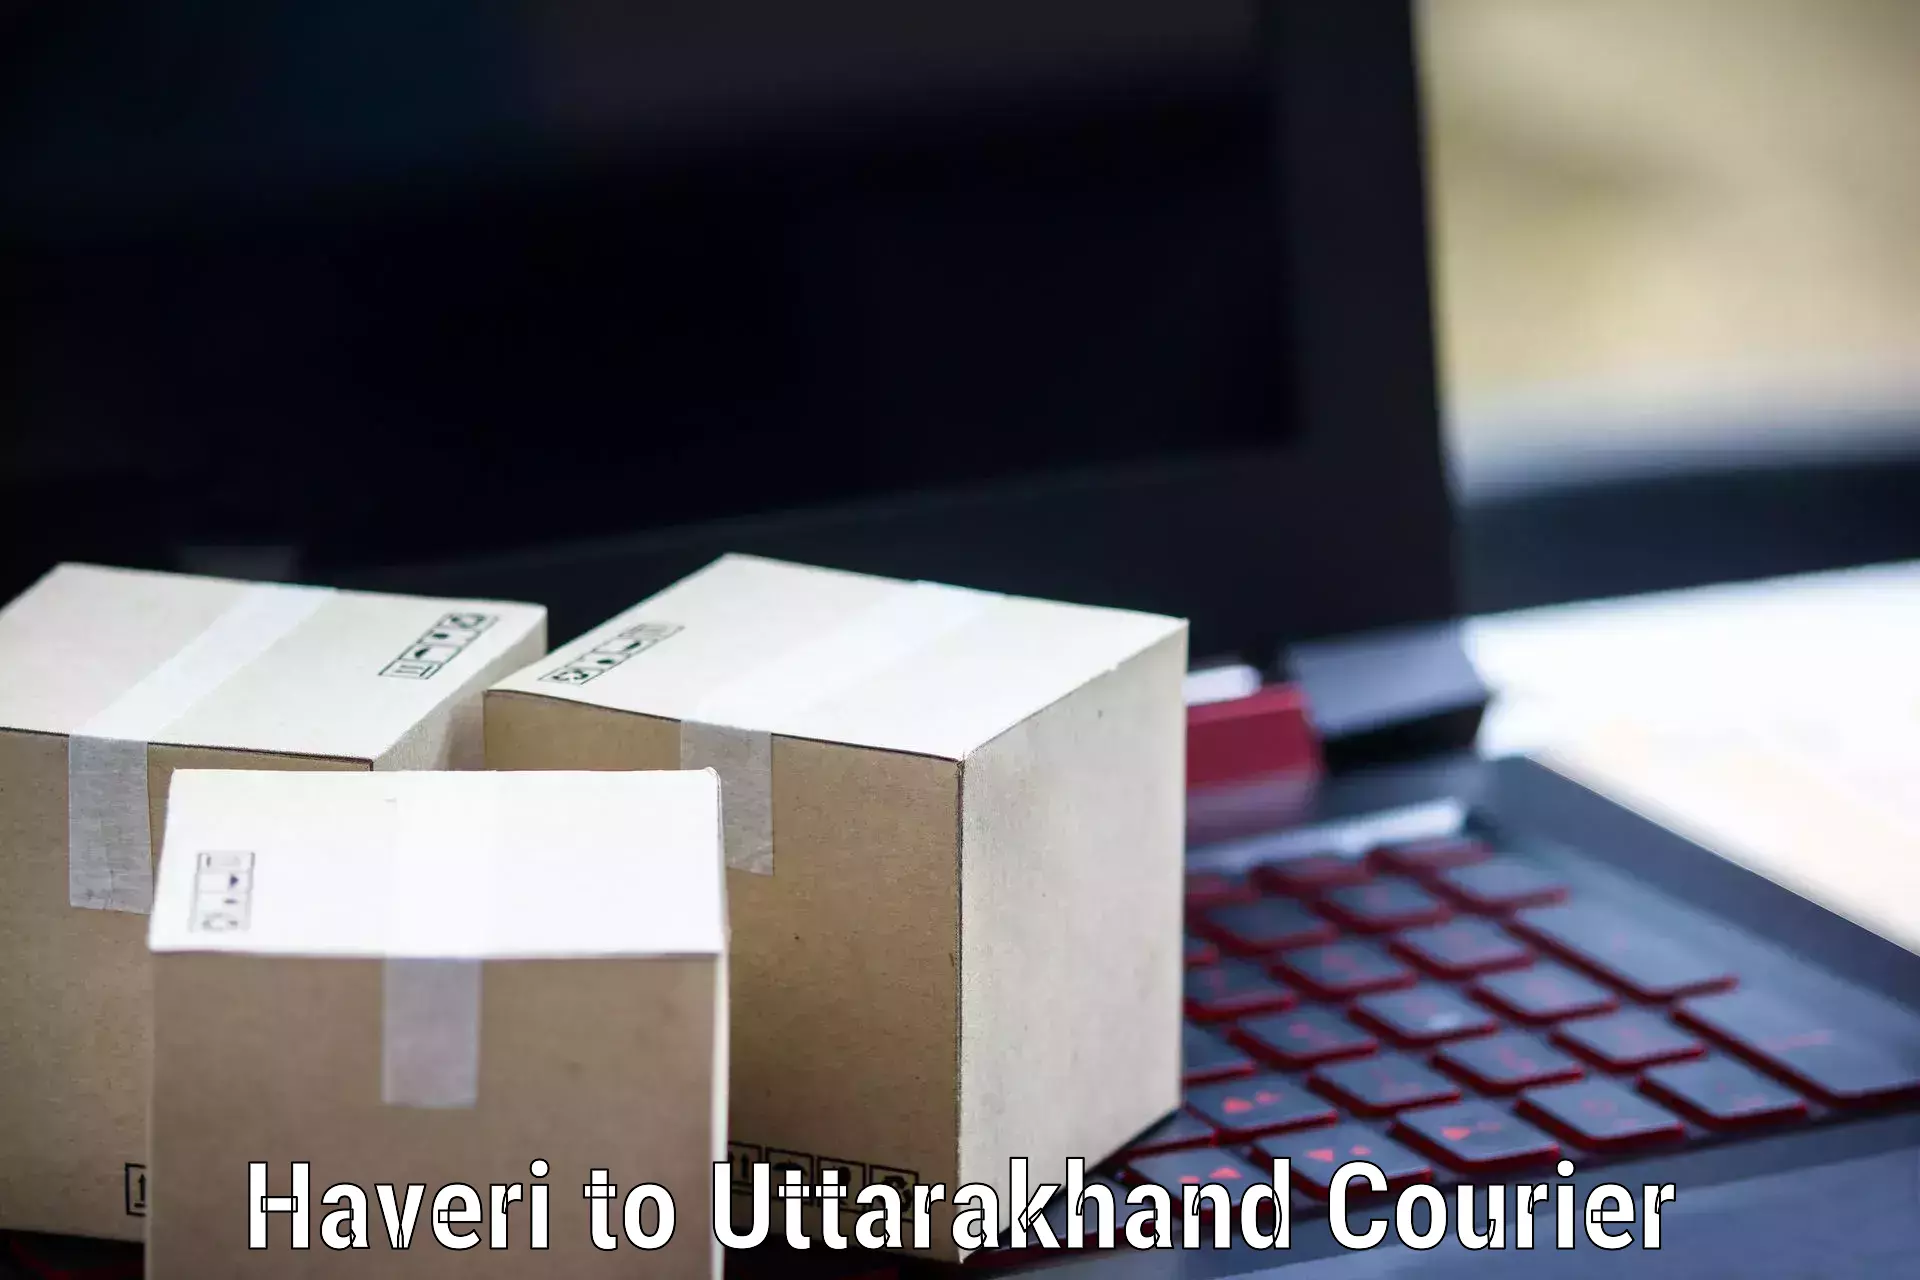 Multi-city courier Haveri to Mussoorie